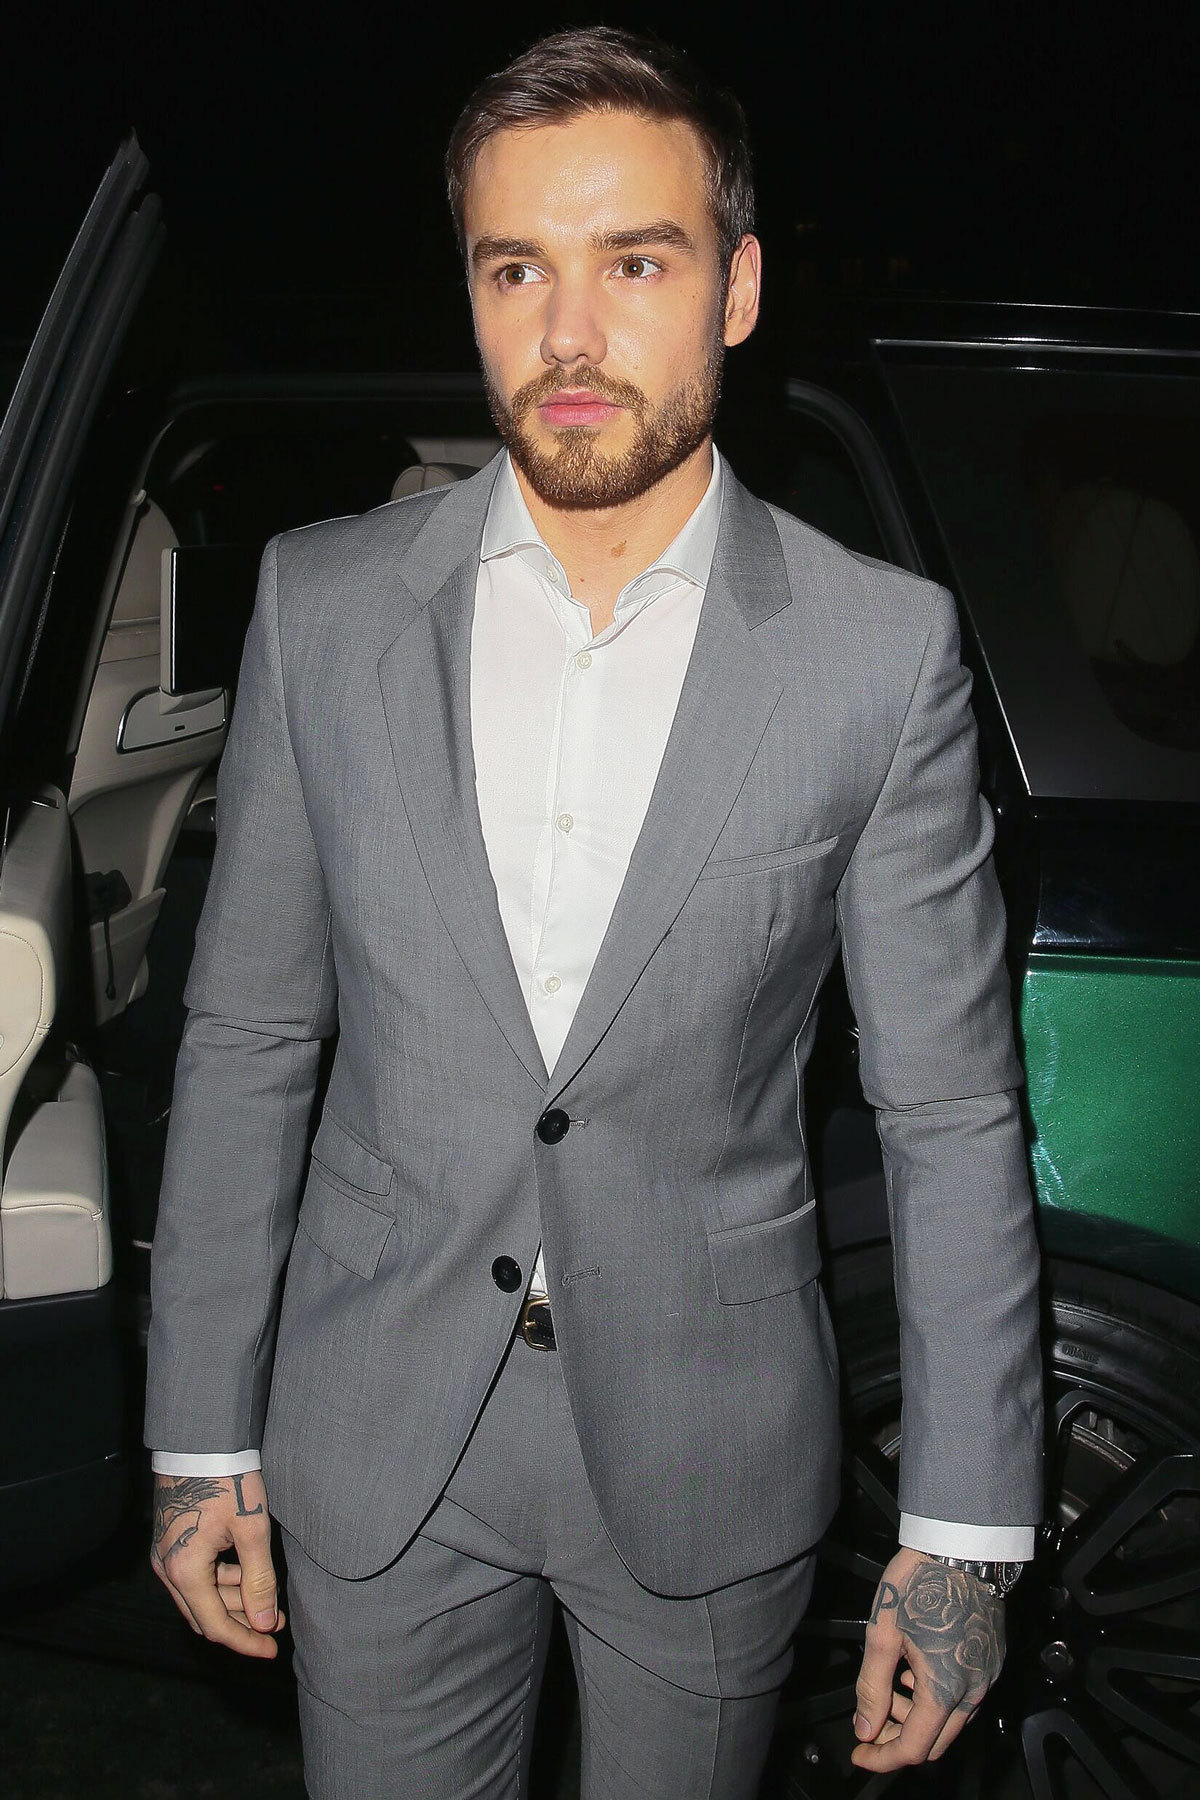 [REQ] Liam Payne at the British Vogue x Tiffany’s Fashion and Film BAFTA After Party